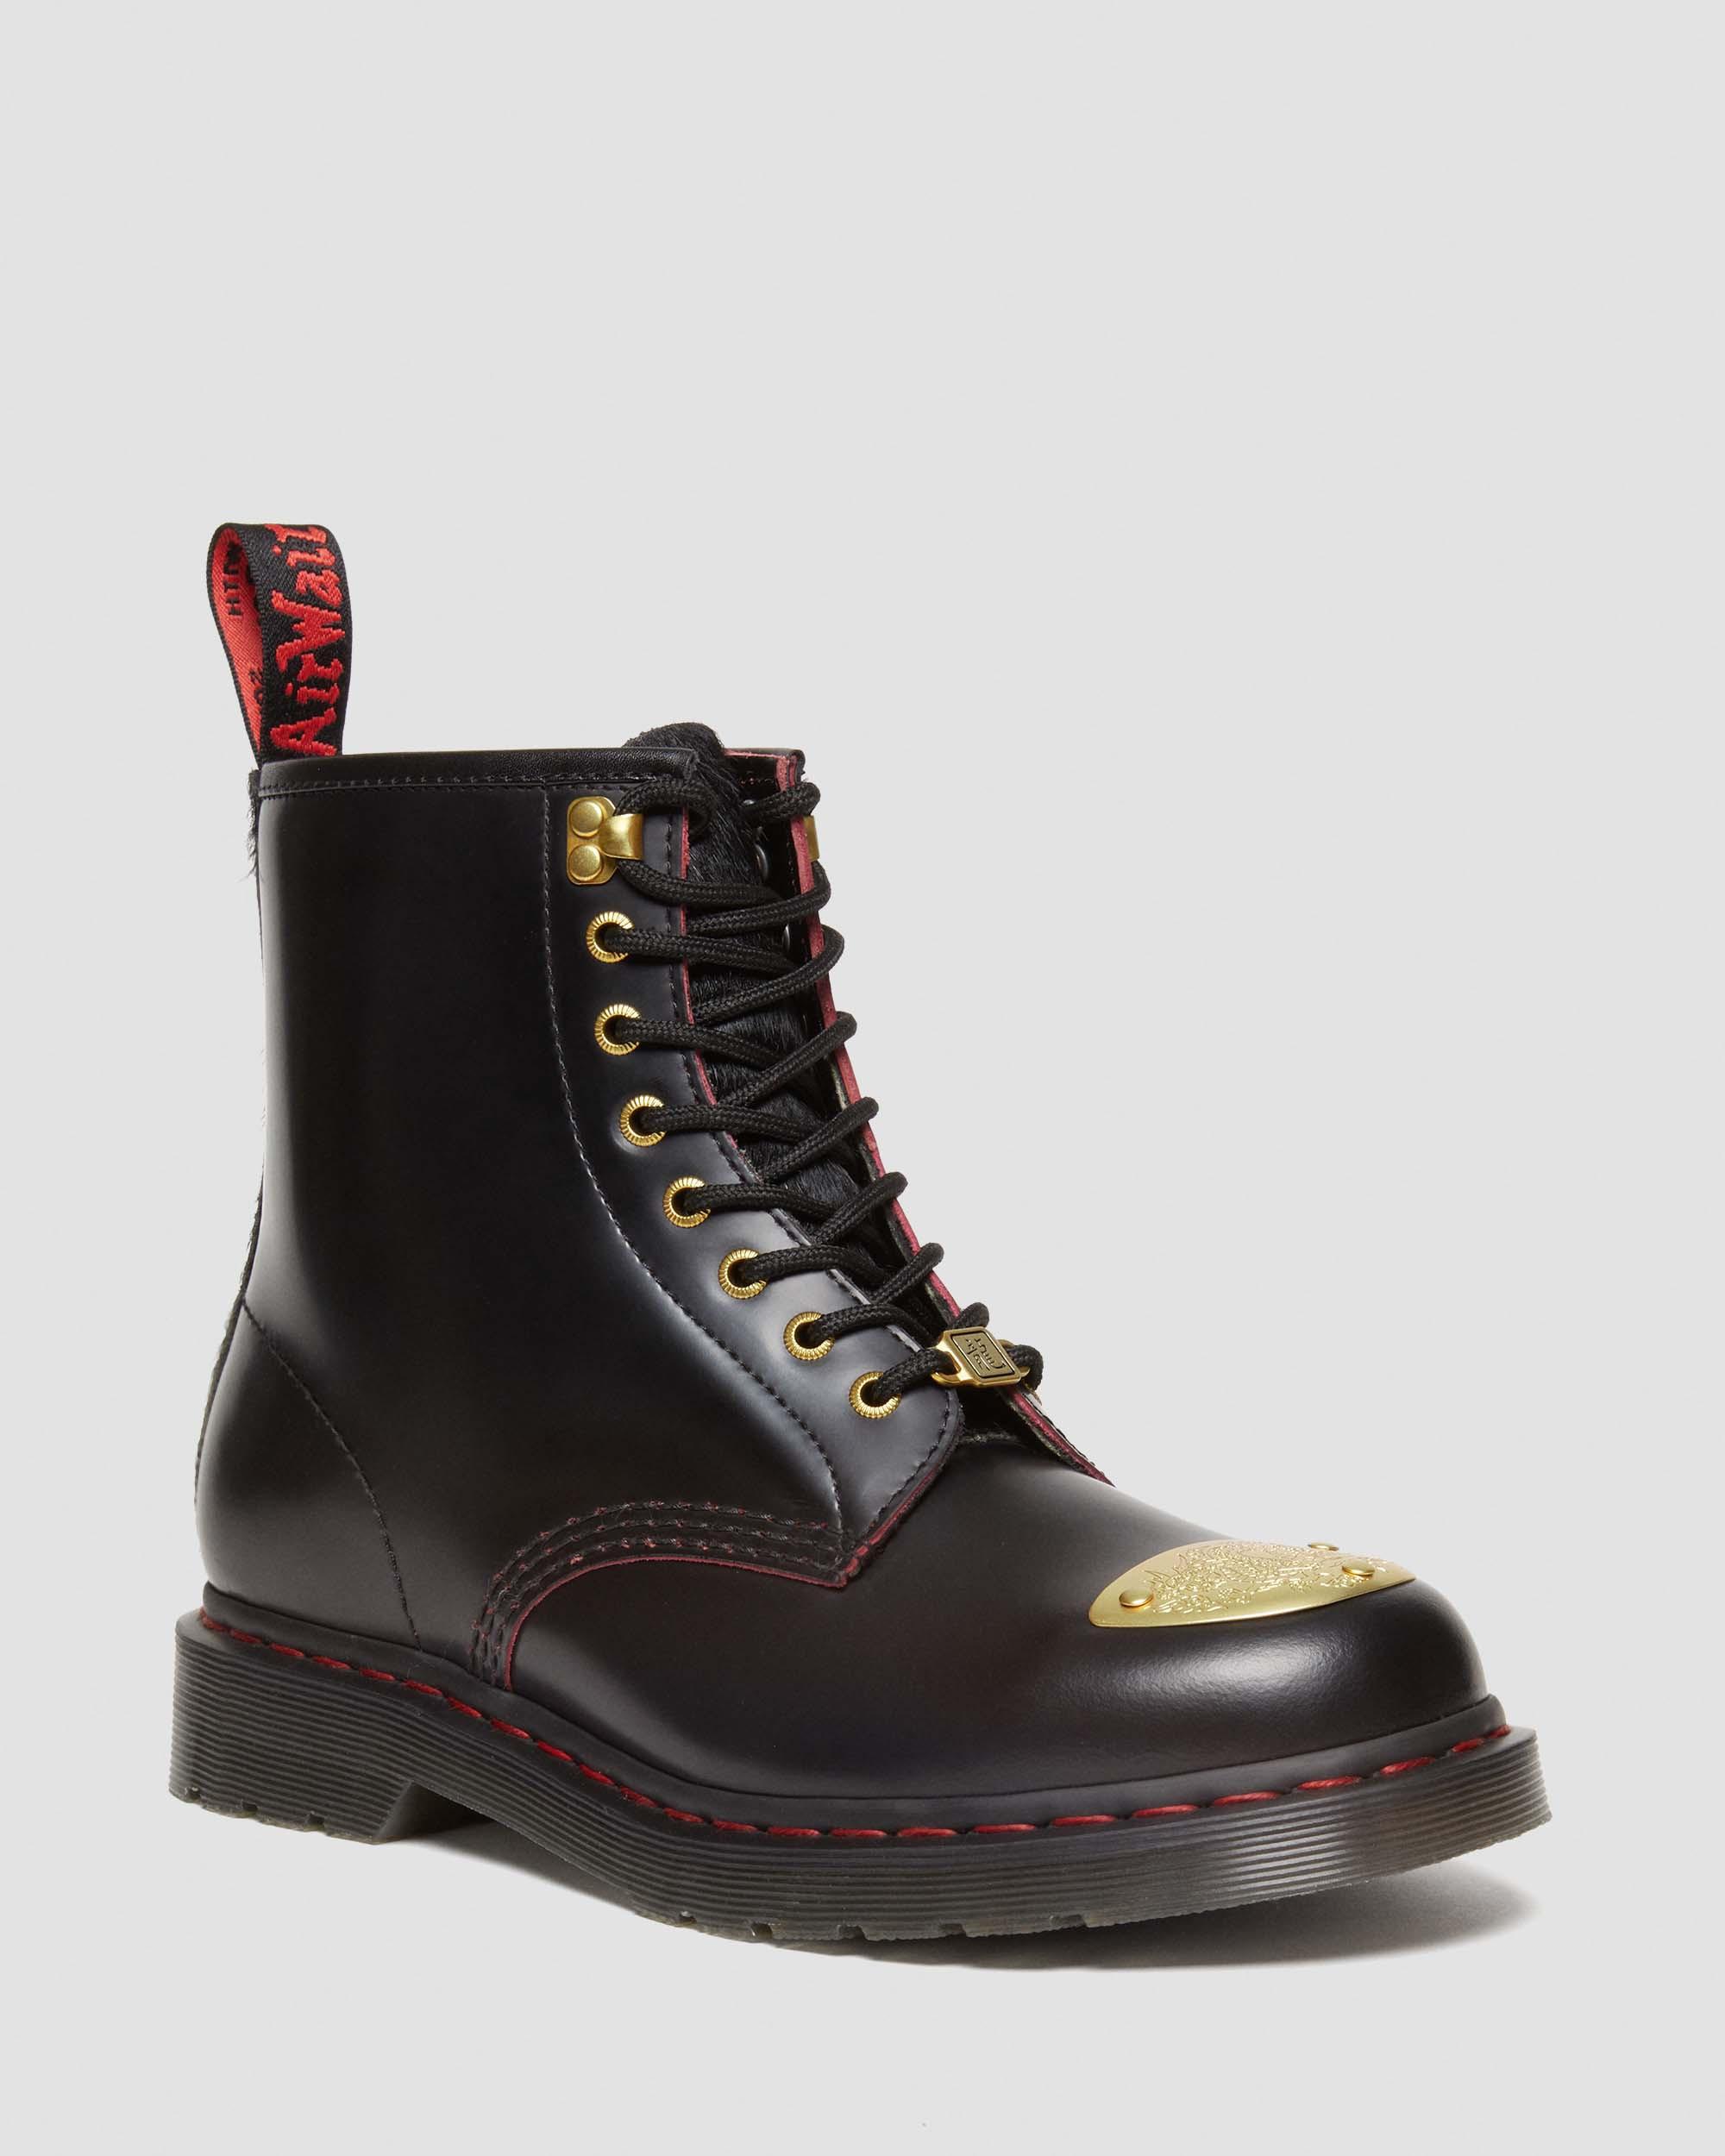 Boots 1460 Year of the Dragon en cuir à lacets in Black+Red+Black